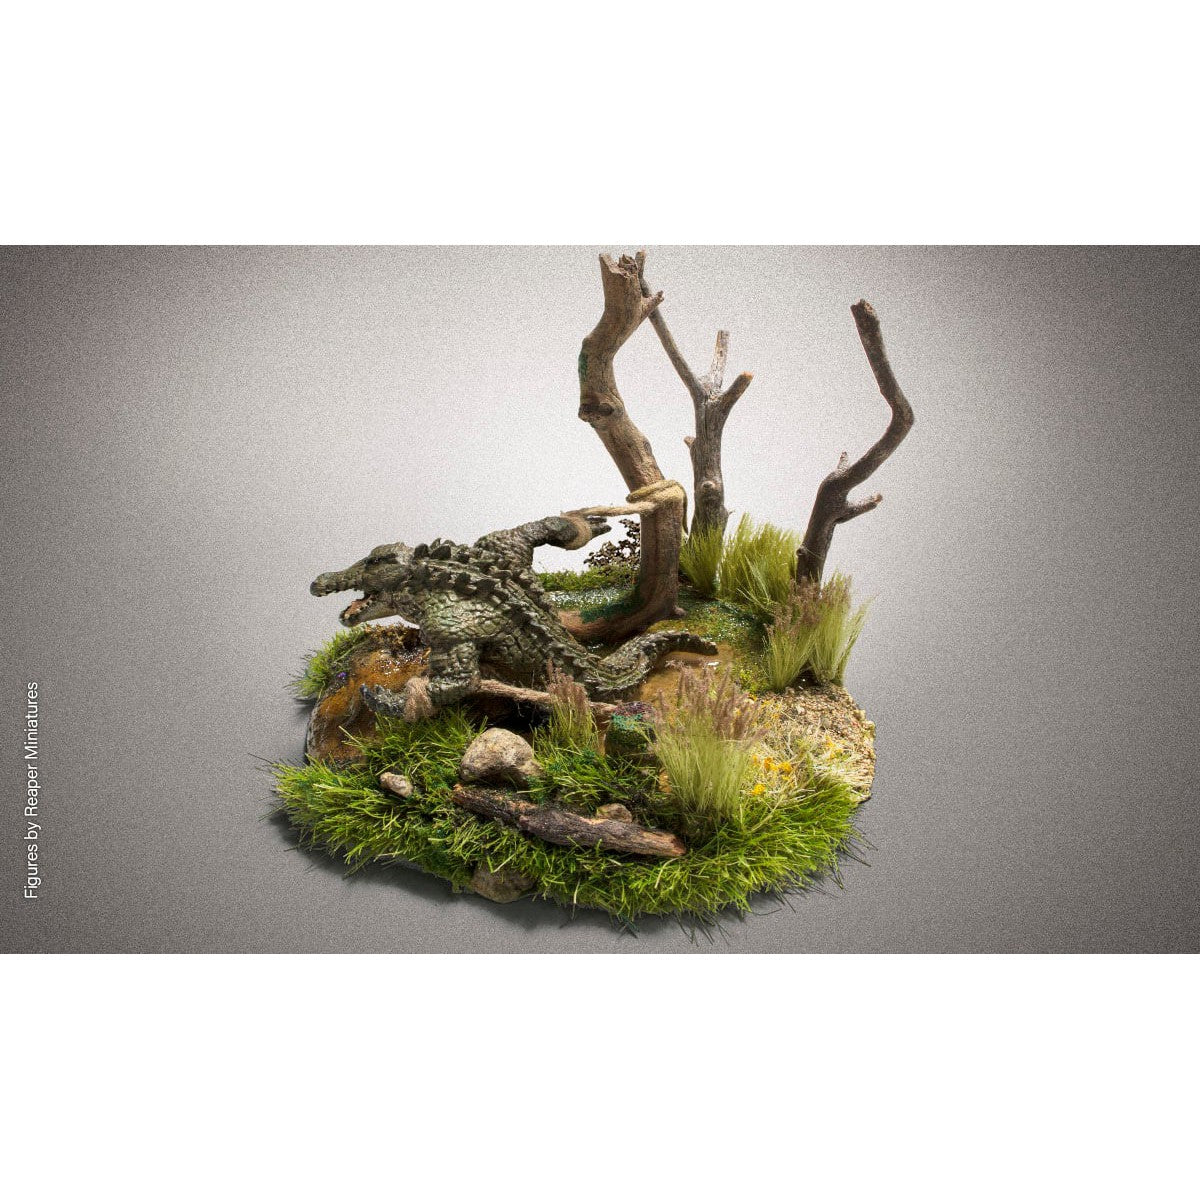 Purple Flowers - Purple Flowers add the perfect pop of color to your terrain feature, miniature base or gaming board